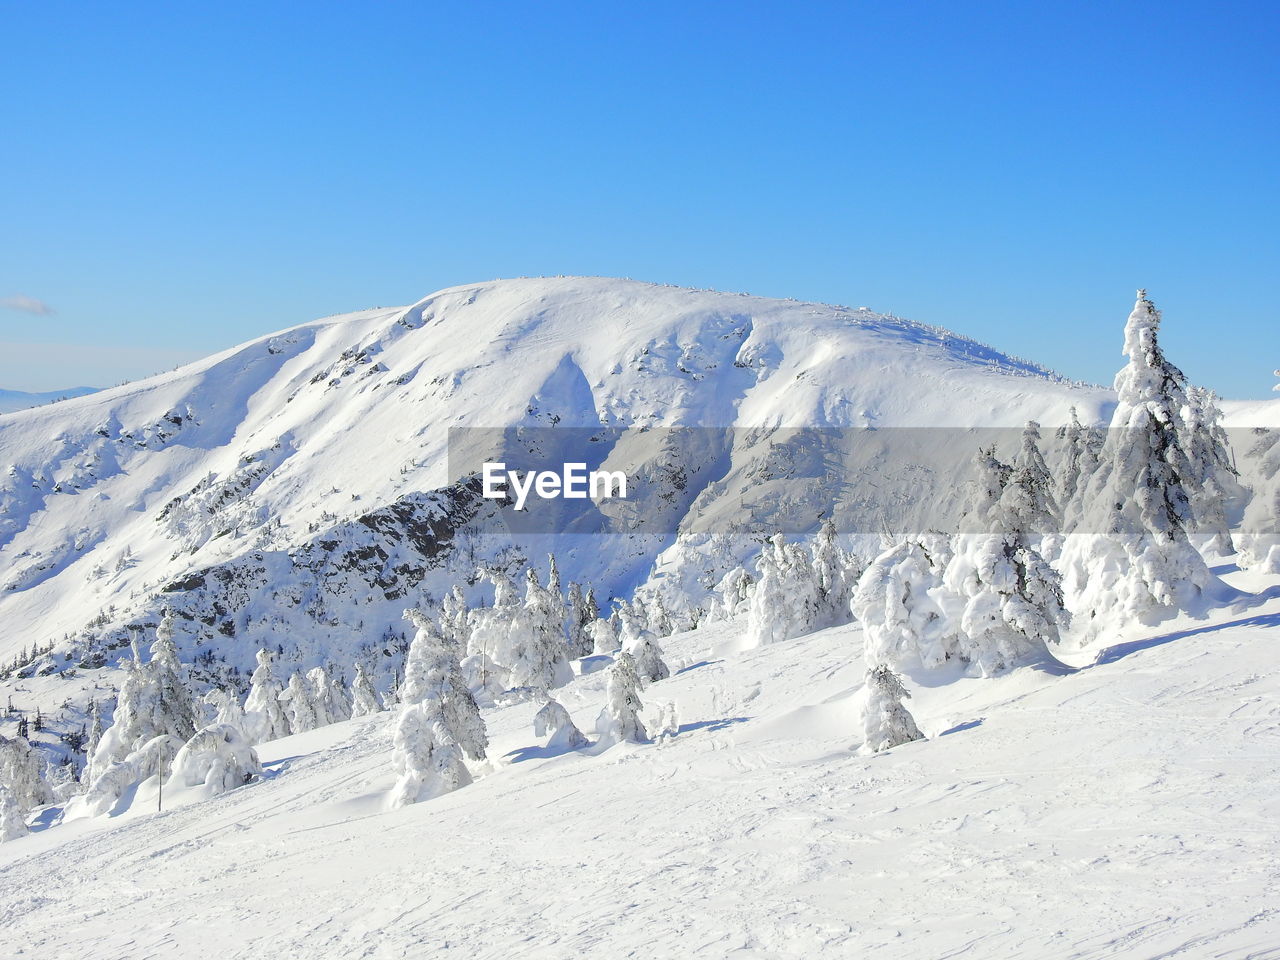 PANORAMIC VIEW OF SNOWCAPPED MOUNTAINS AGAINST CLEAR BLUE SKY